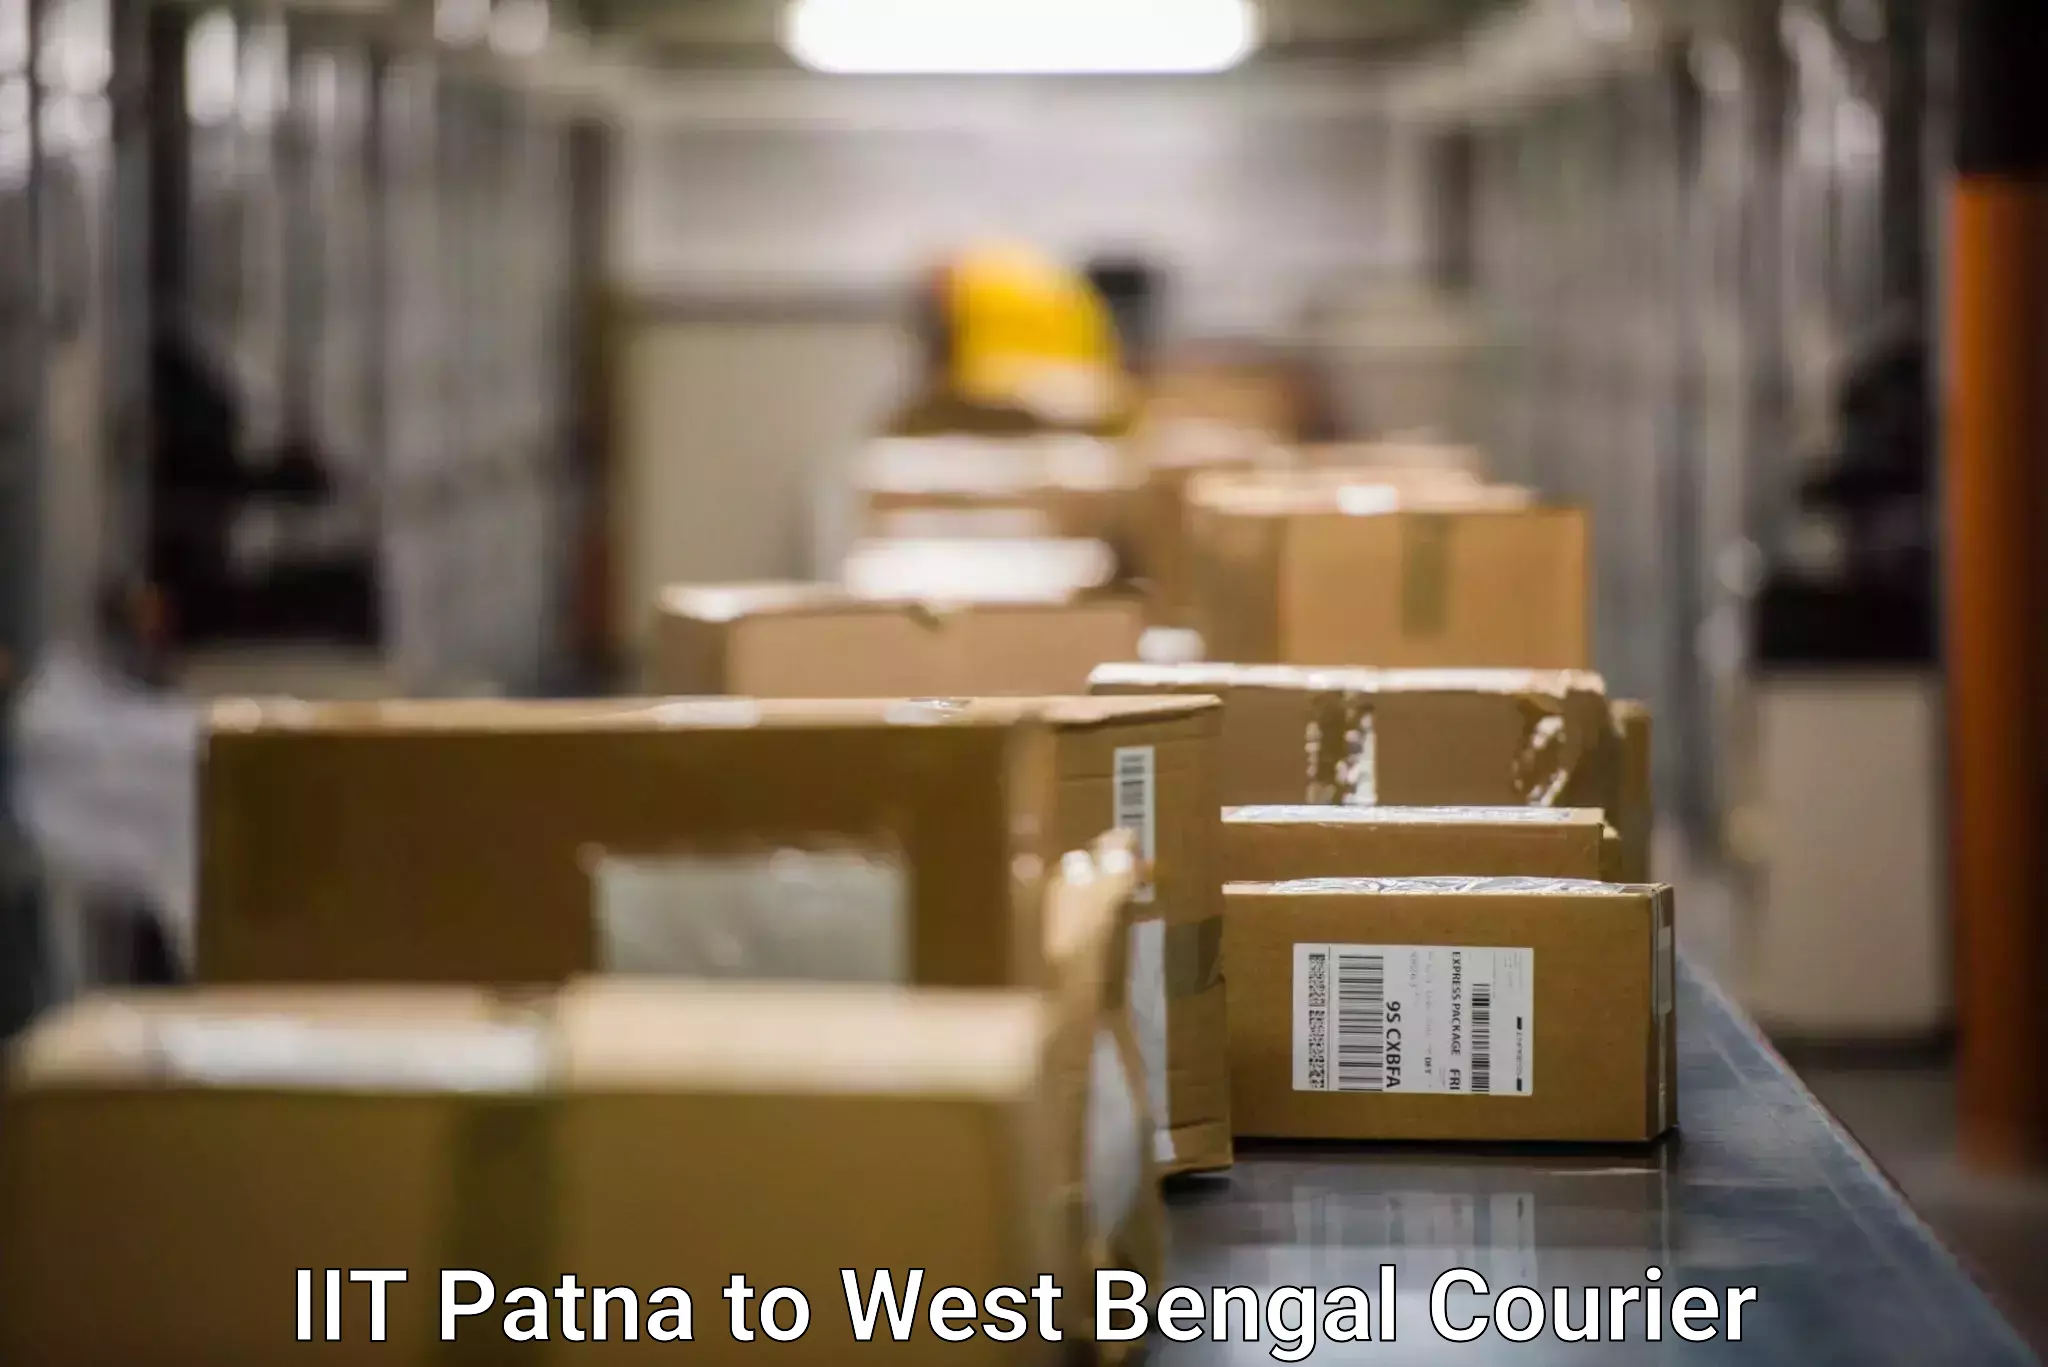 Urban courier service IIT Patna to West Bengal